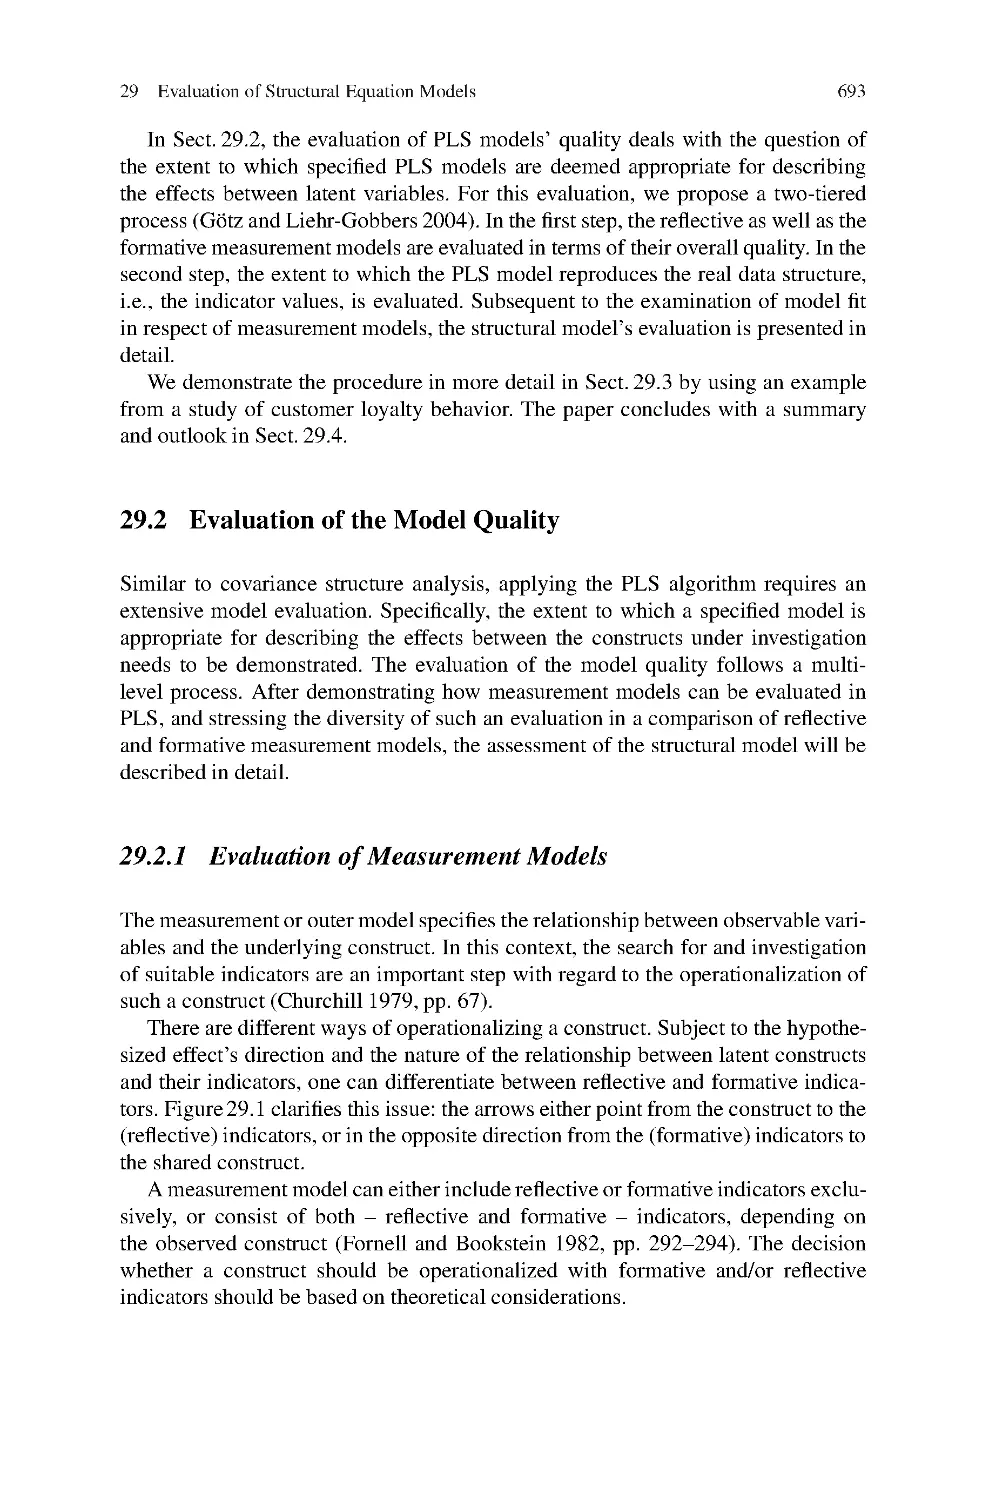 29.2 Evaluation of the Model Quality